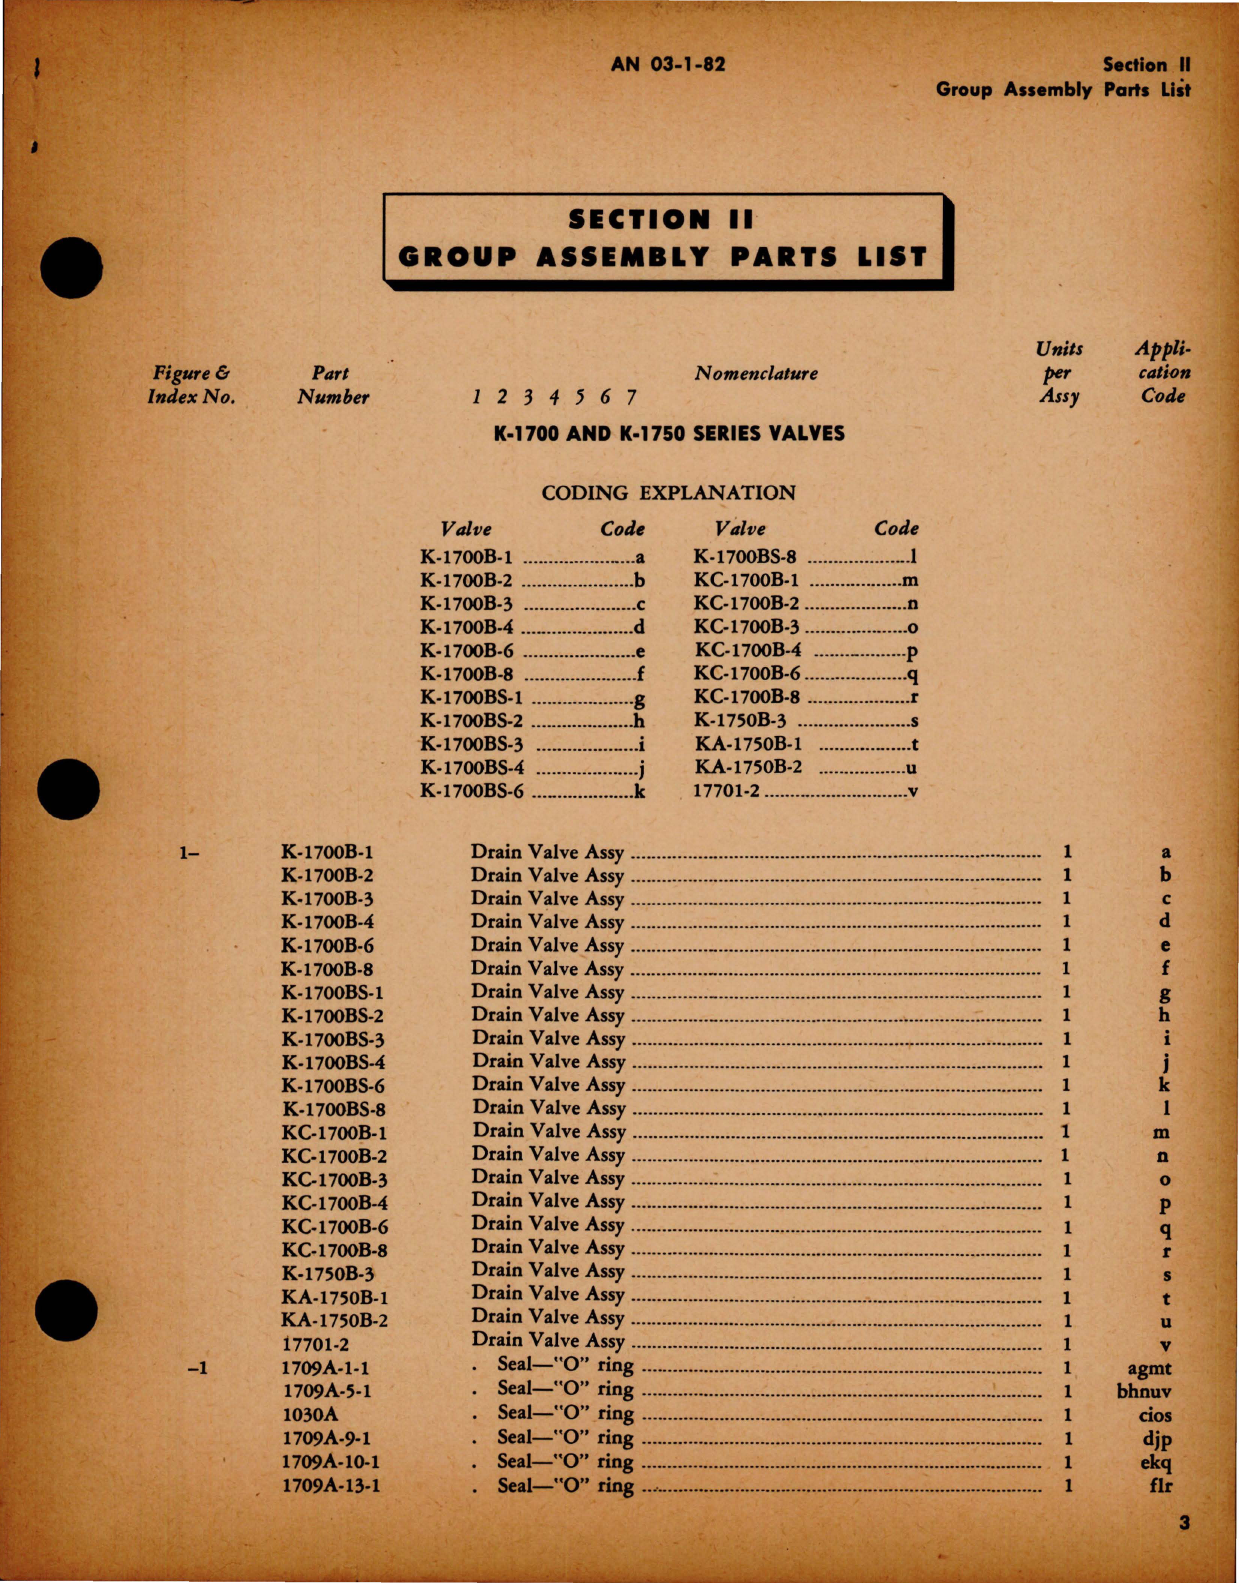 Sample page 5 from AirCorps Library document: Parts Catalog for Drain Valves 